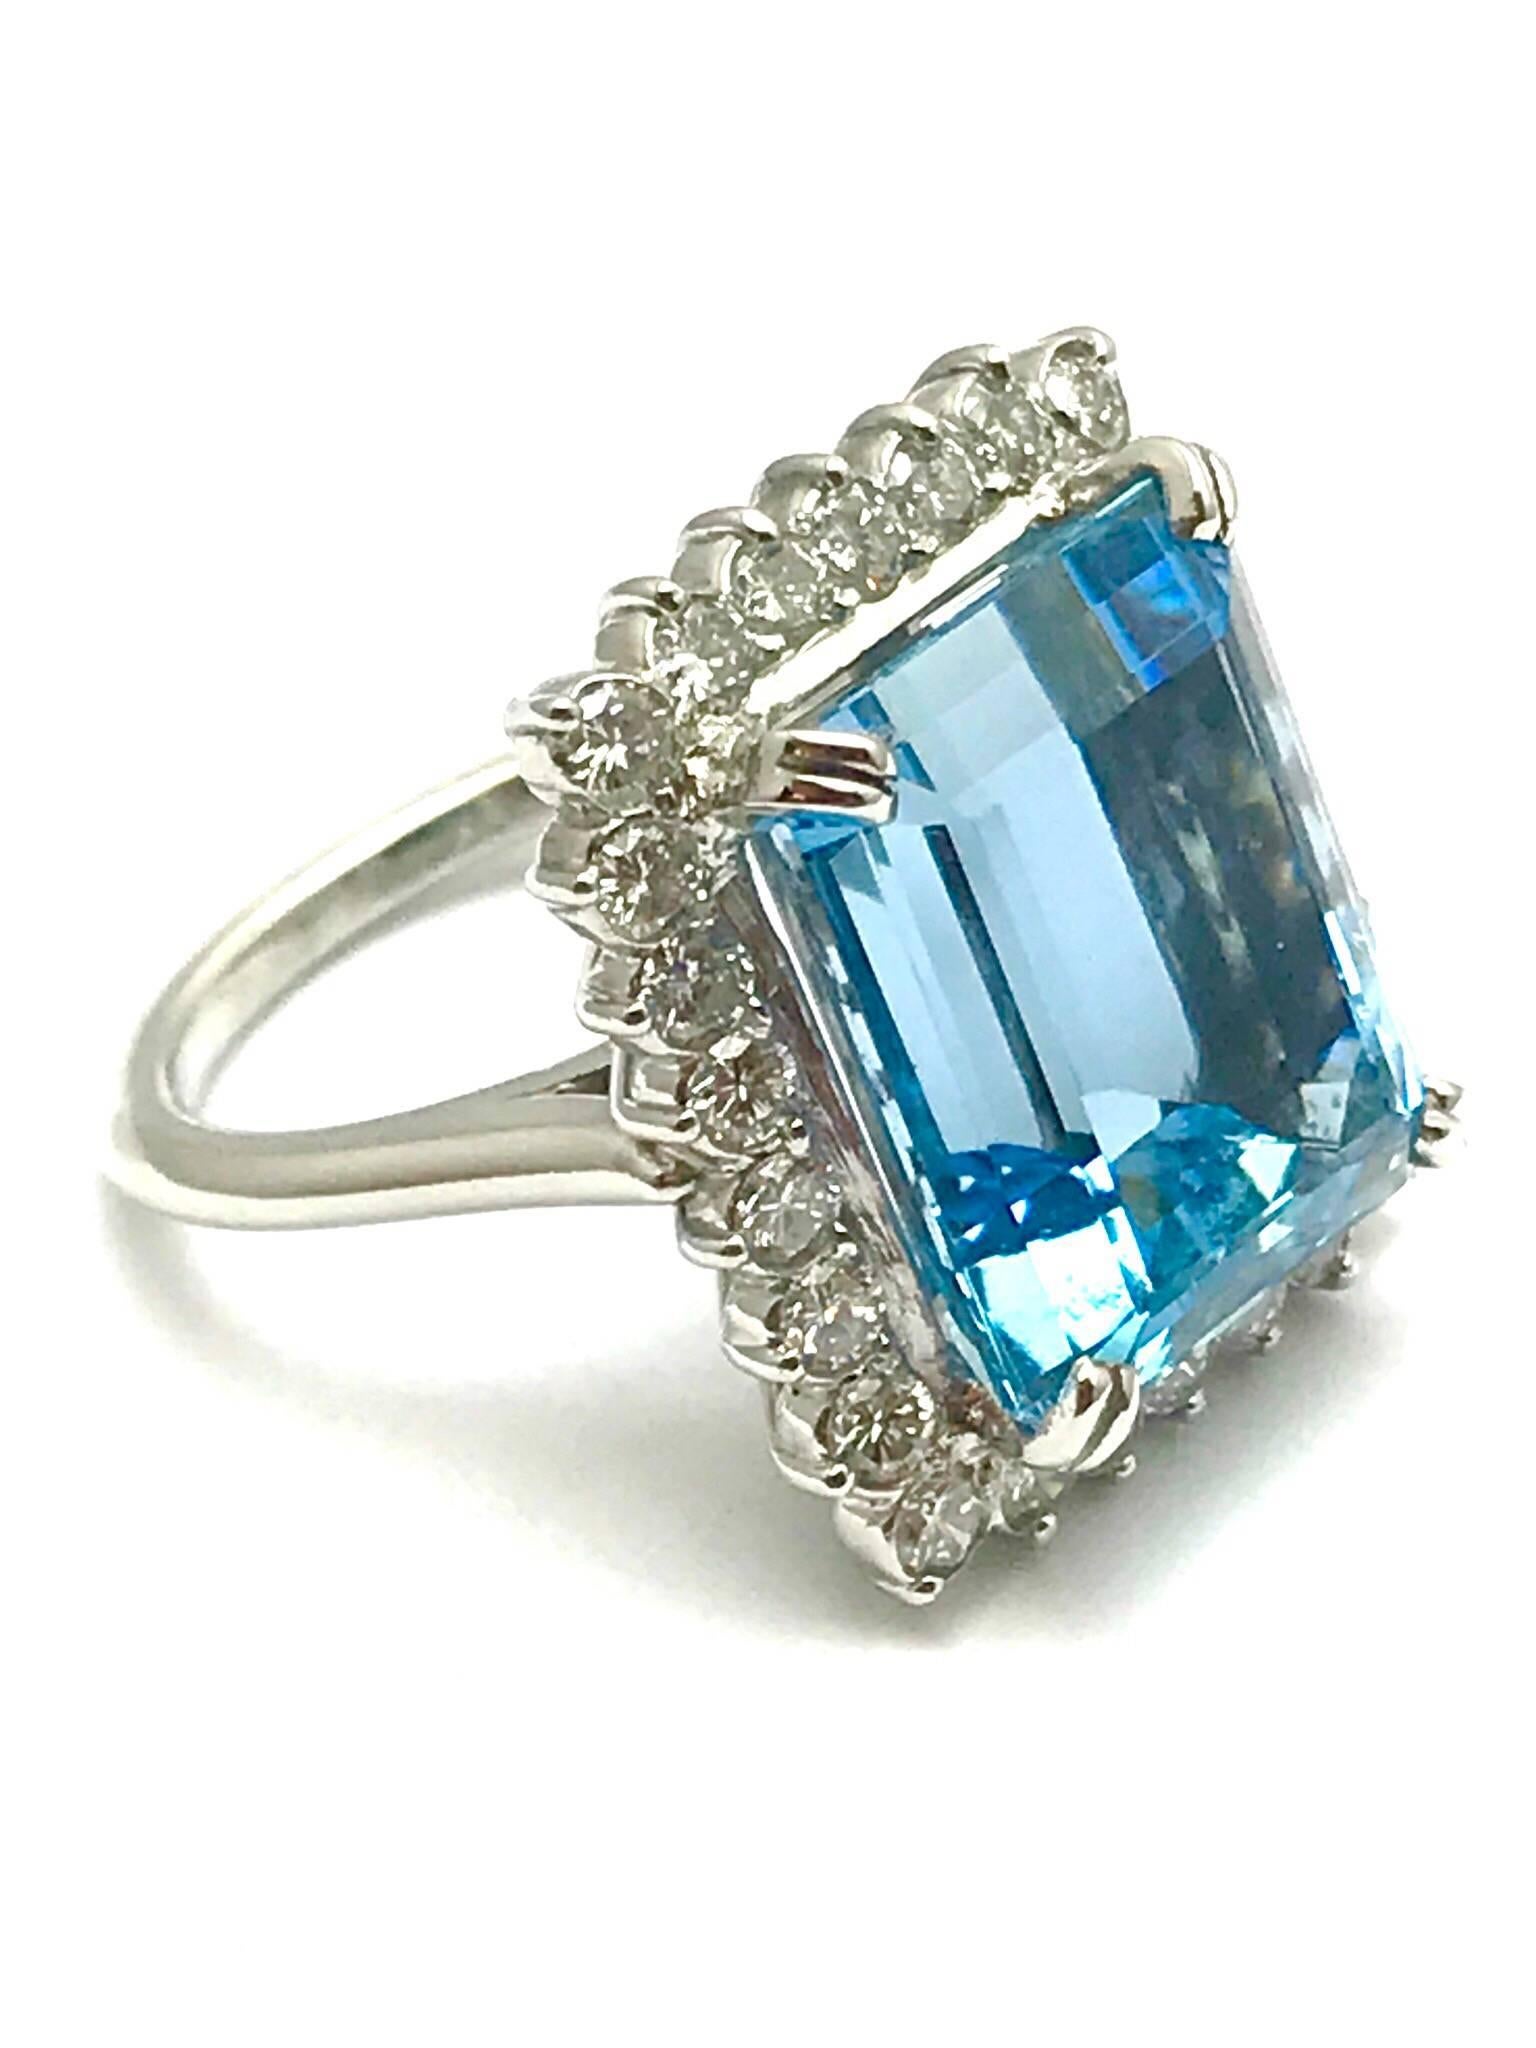 A 12.16 carat emerald cut aquamarine and diamond platinum ring.  The aquamarines is set with four double prongs sitting above a single row of 26 round brilliant diamonds that have a total weight of 1.10 carats, and are graded as F-G color, VS